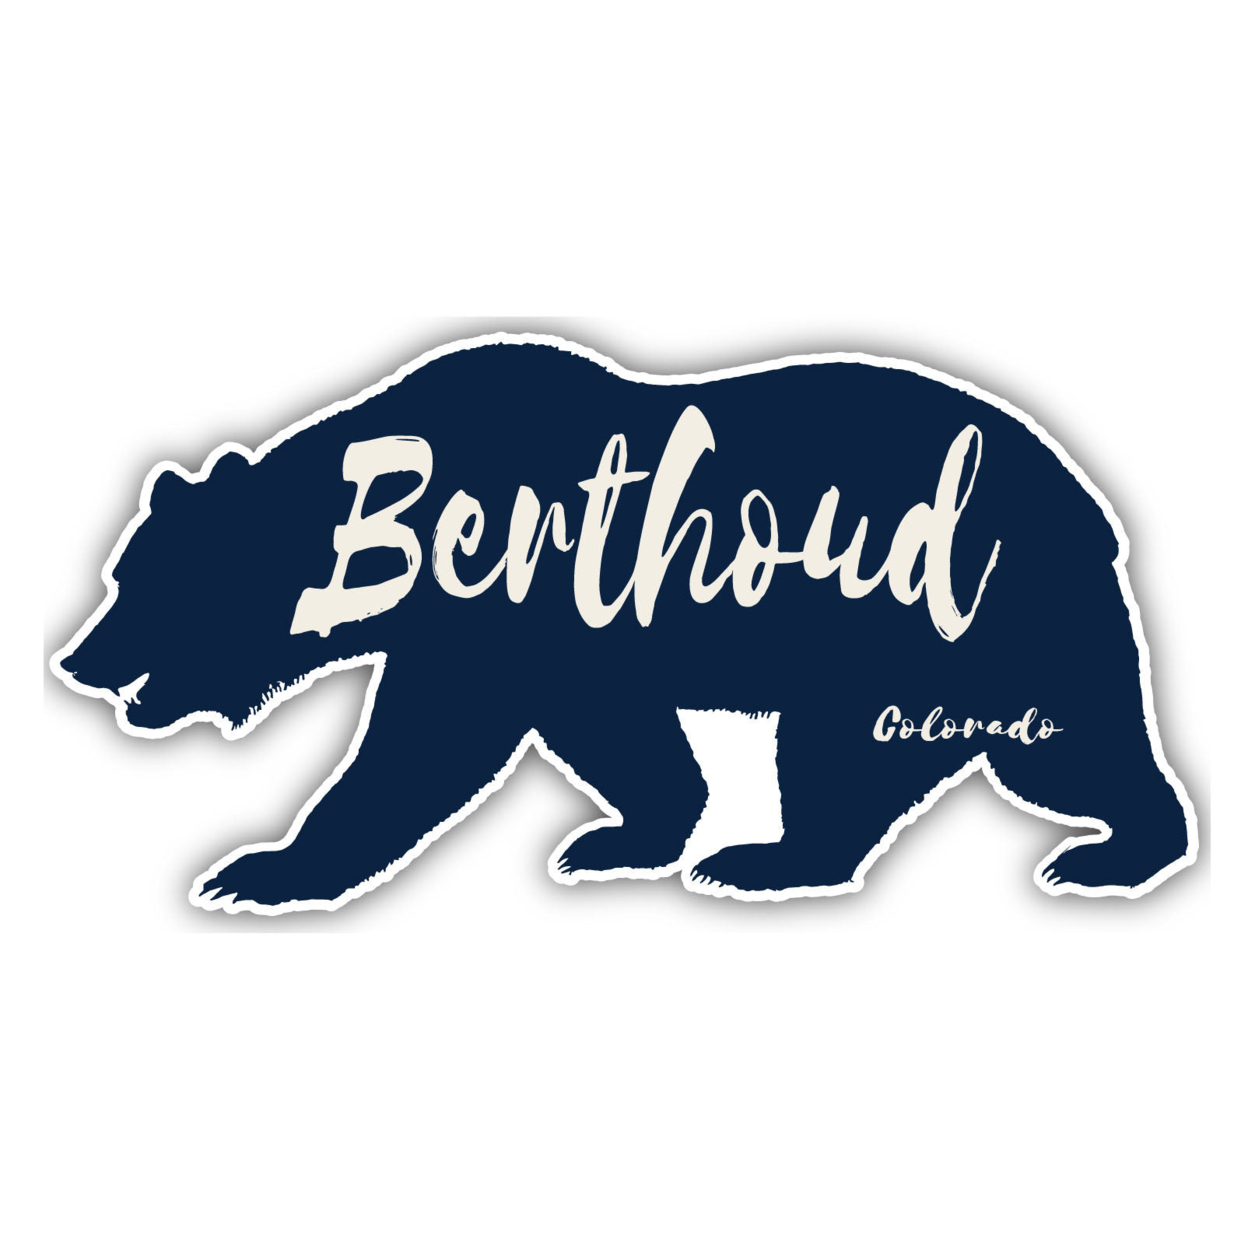 Berthoud Colorado Souvenir Decorative Stickers (Choose Theme And Size) - 4-Pack, 8-Inch, Adventures Awaits